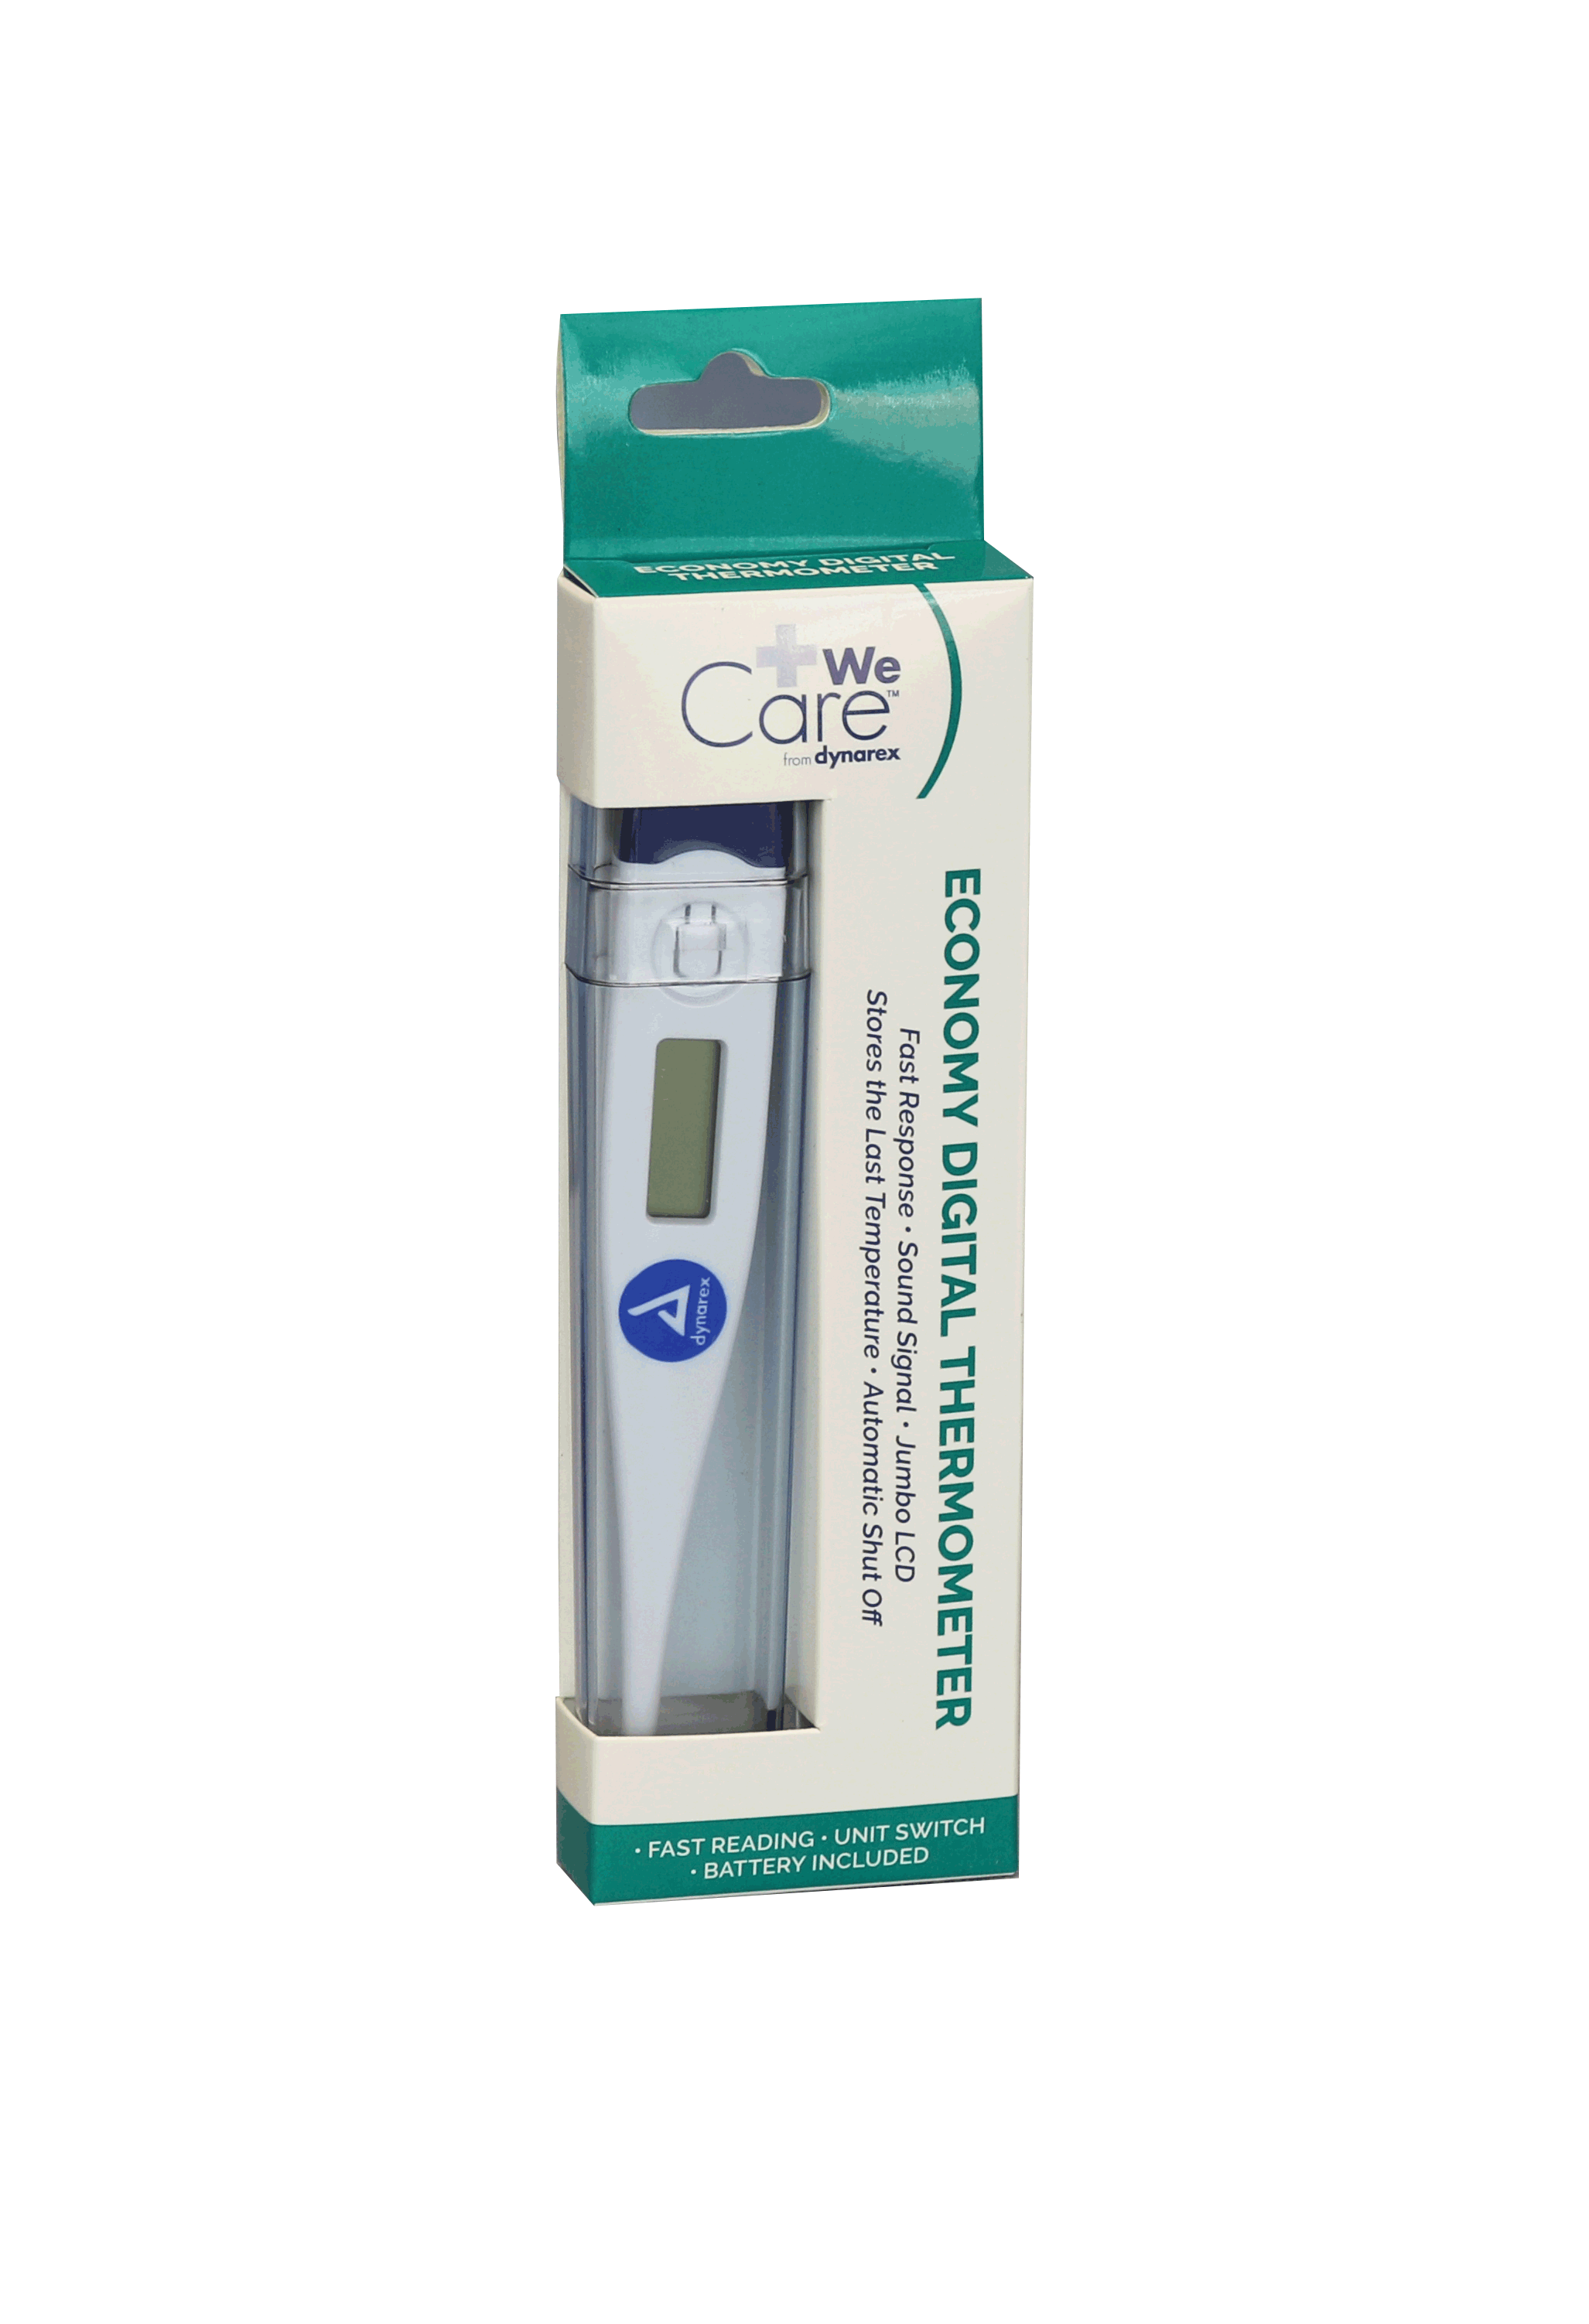 MABIS Digital Thermometer for Adults, Thermometer for Adults